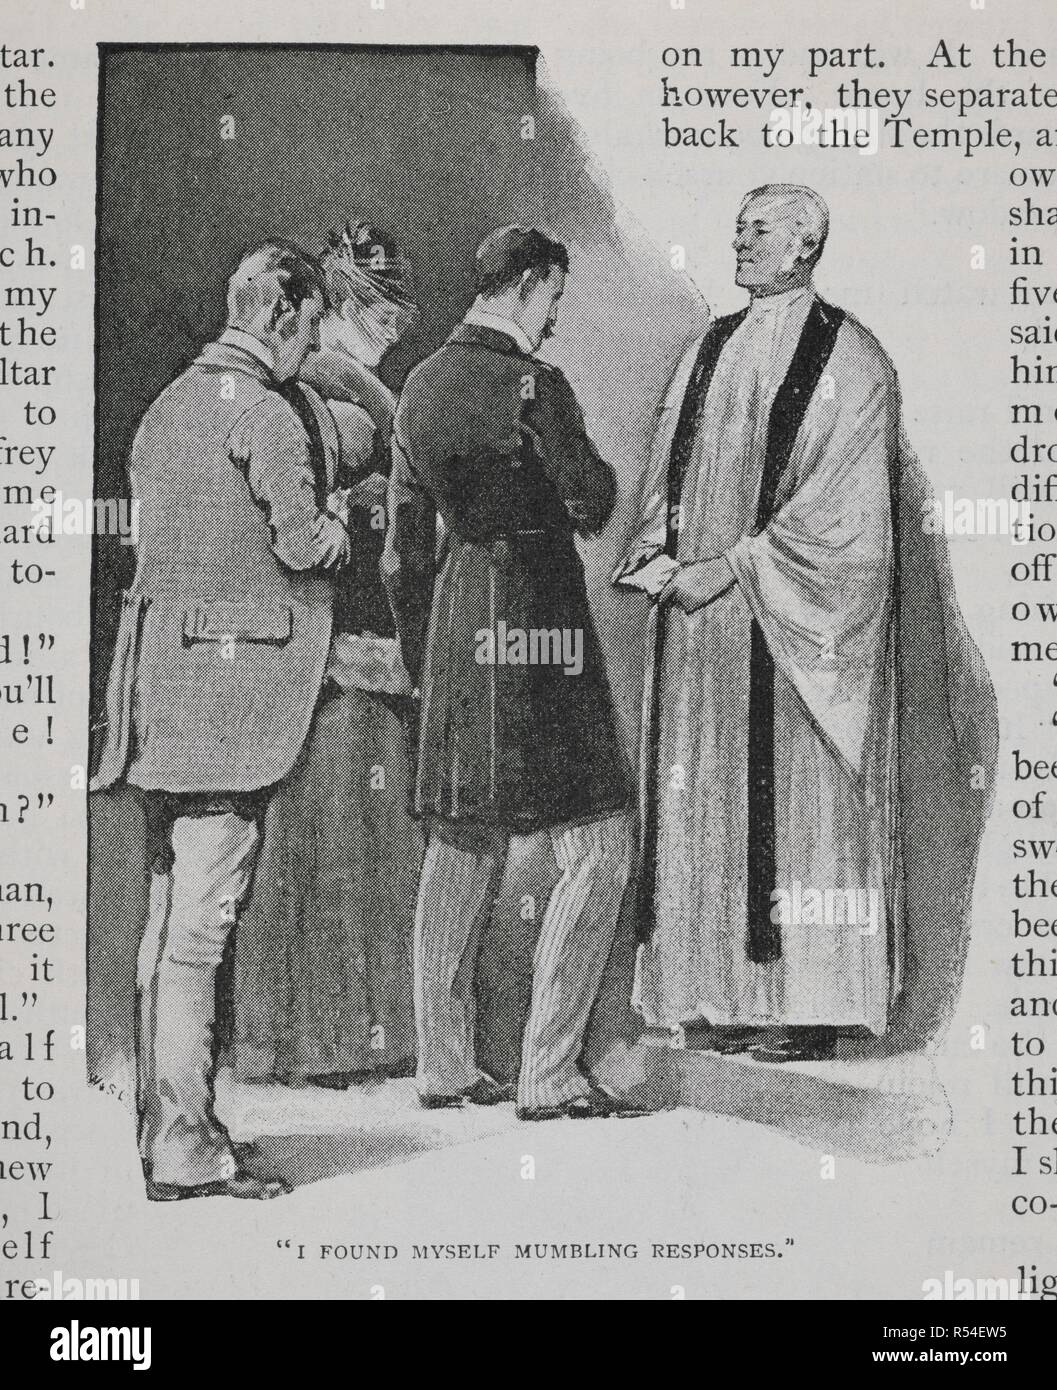 'I found myself mumbling respsonses.' Sherlock Holmes, at the wedding of Irene Adler and Godfrey Norton. Illustration for the story, 'a scandal in Bohemia.'. The Strand magazine : an illustrated monthly / edited by G. Newnes. London, 1891, July to December. Source: P.P.6004.glk, volume II. page 69. Author: DOYLE, ARTHUR CONAN. Stock Photo